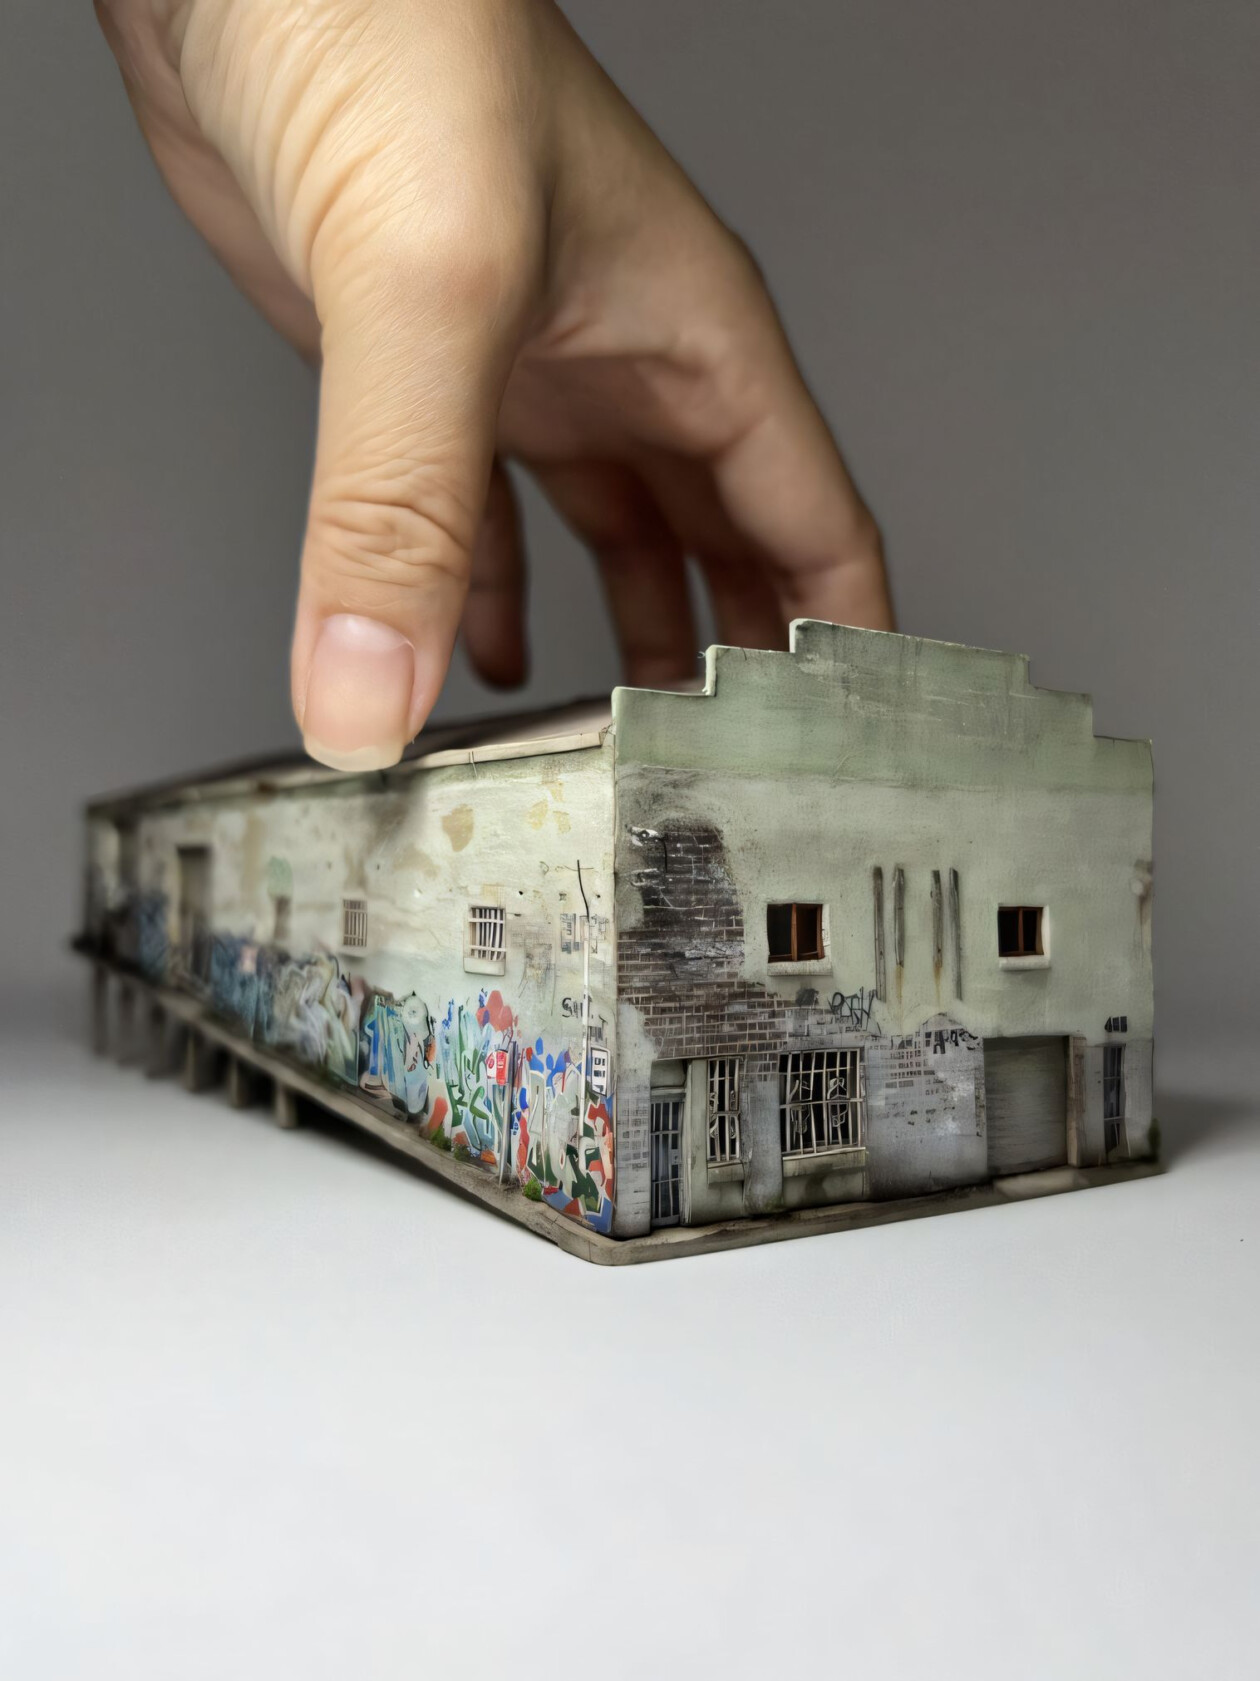 Whimsical Everyday Life And Historical Buildings In Miniature By Mylyn Nguyen (1)